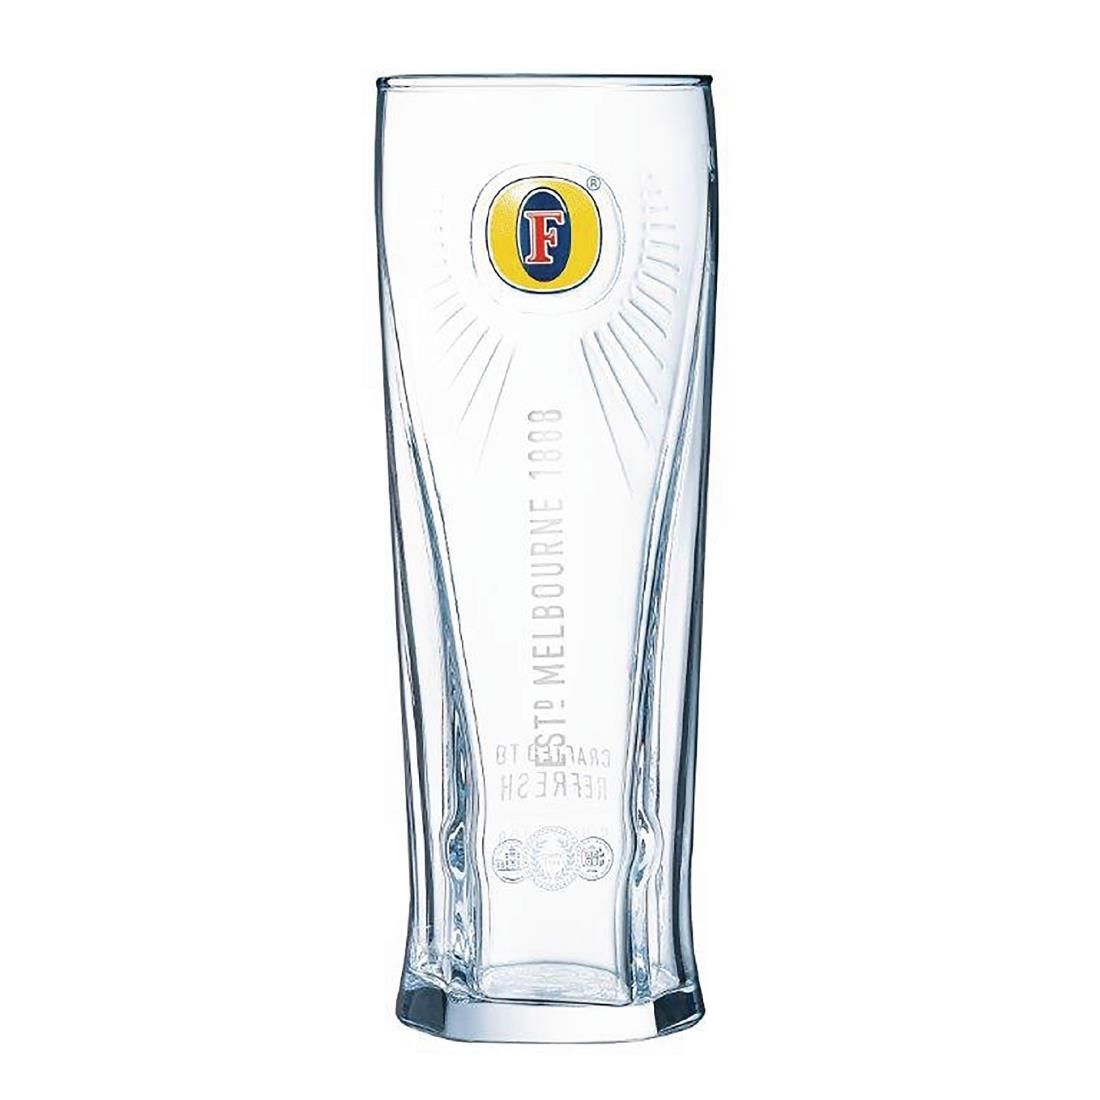 GG890 Arcoroc Fosters Beer Glasses 570ml CE Marked (Pack of 24) JD Catering Equipment Solutions Ltd